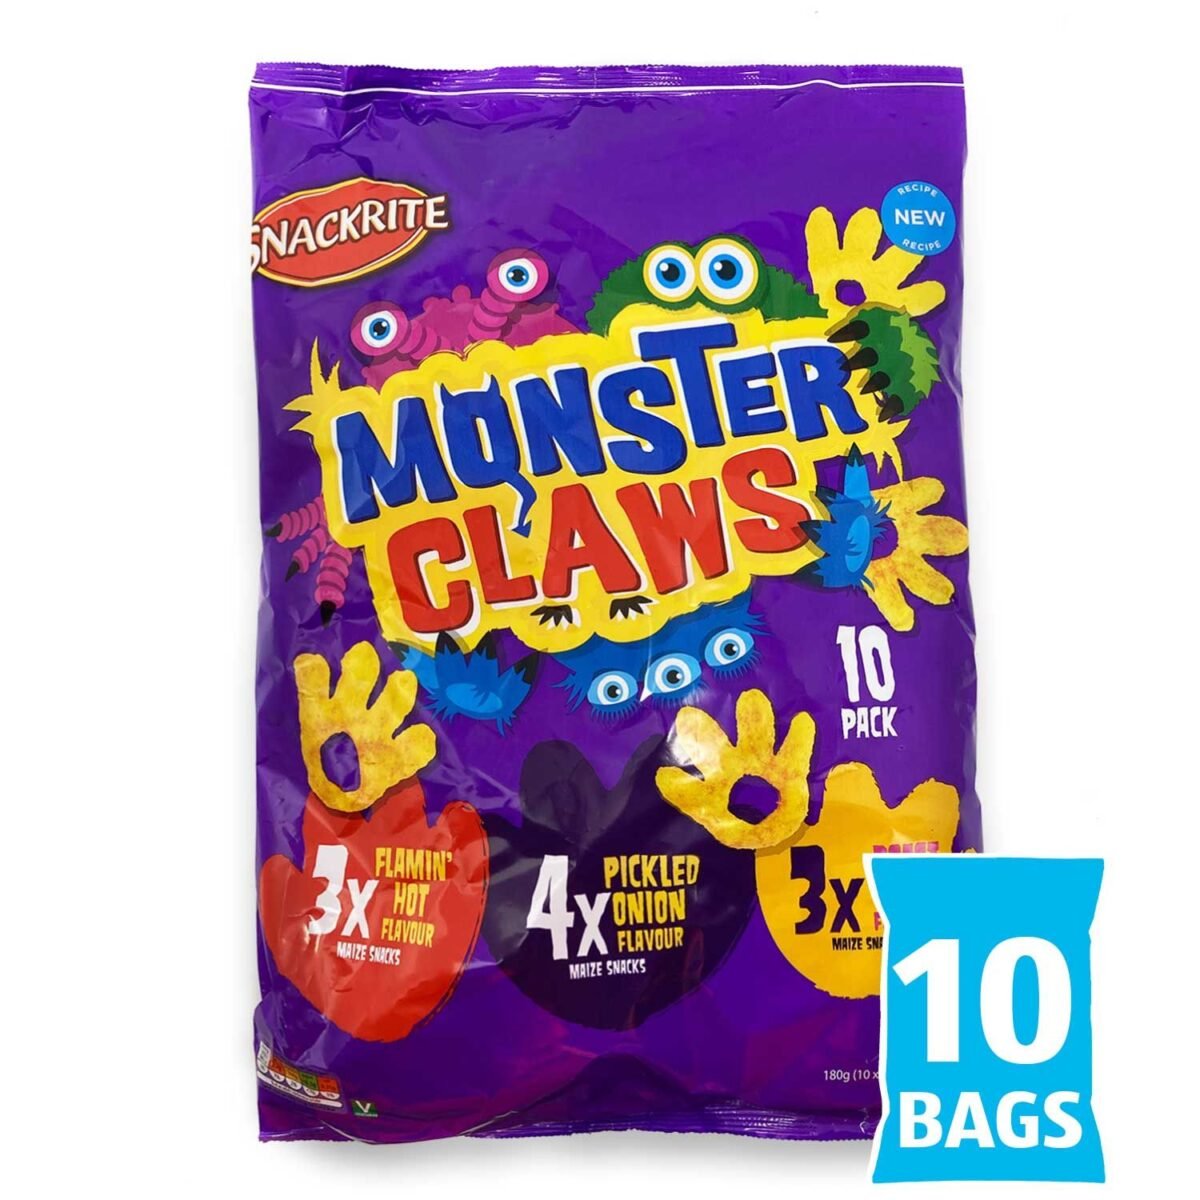 Photo shows a multi-pack of Aldi's Monster Munch-style "Monster Claws."